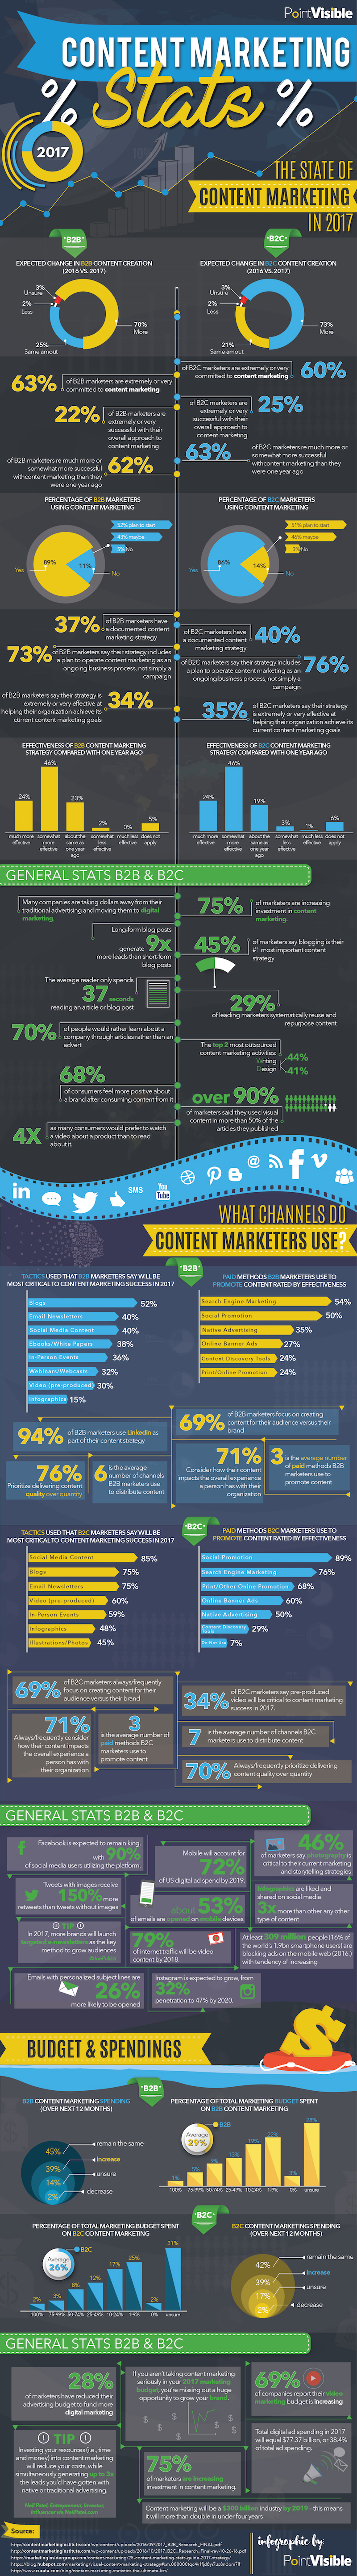 Content Marketing Statistics and Trends